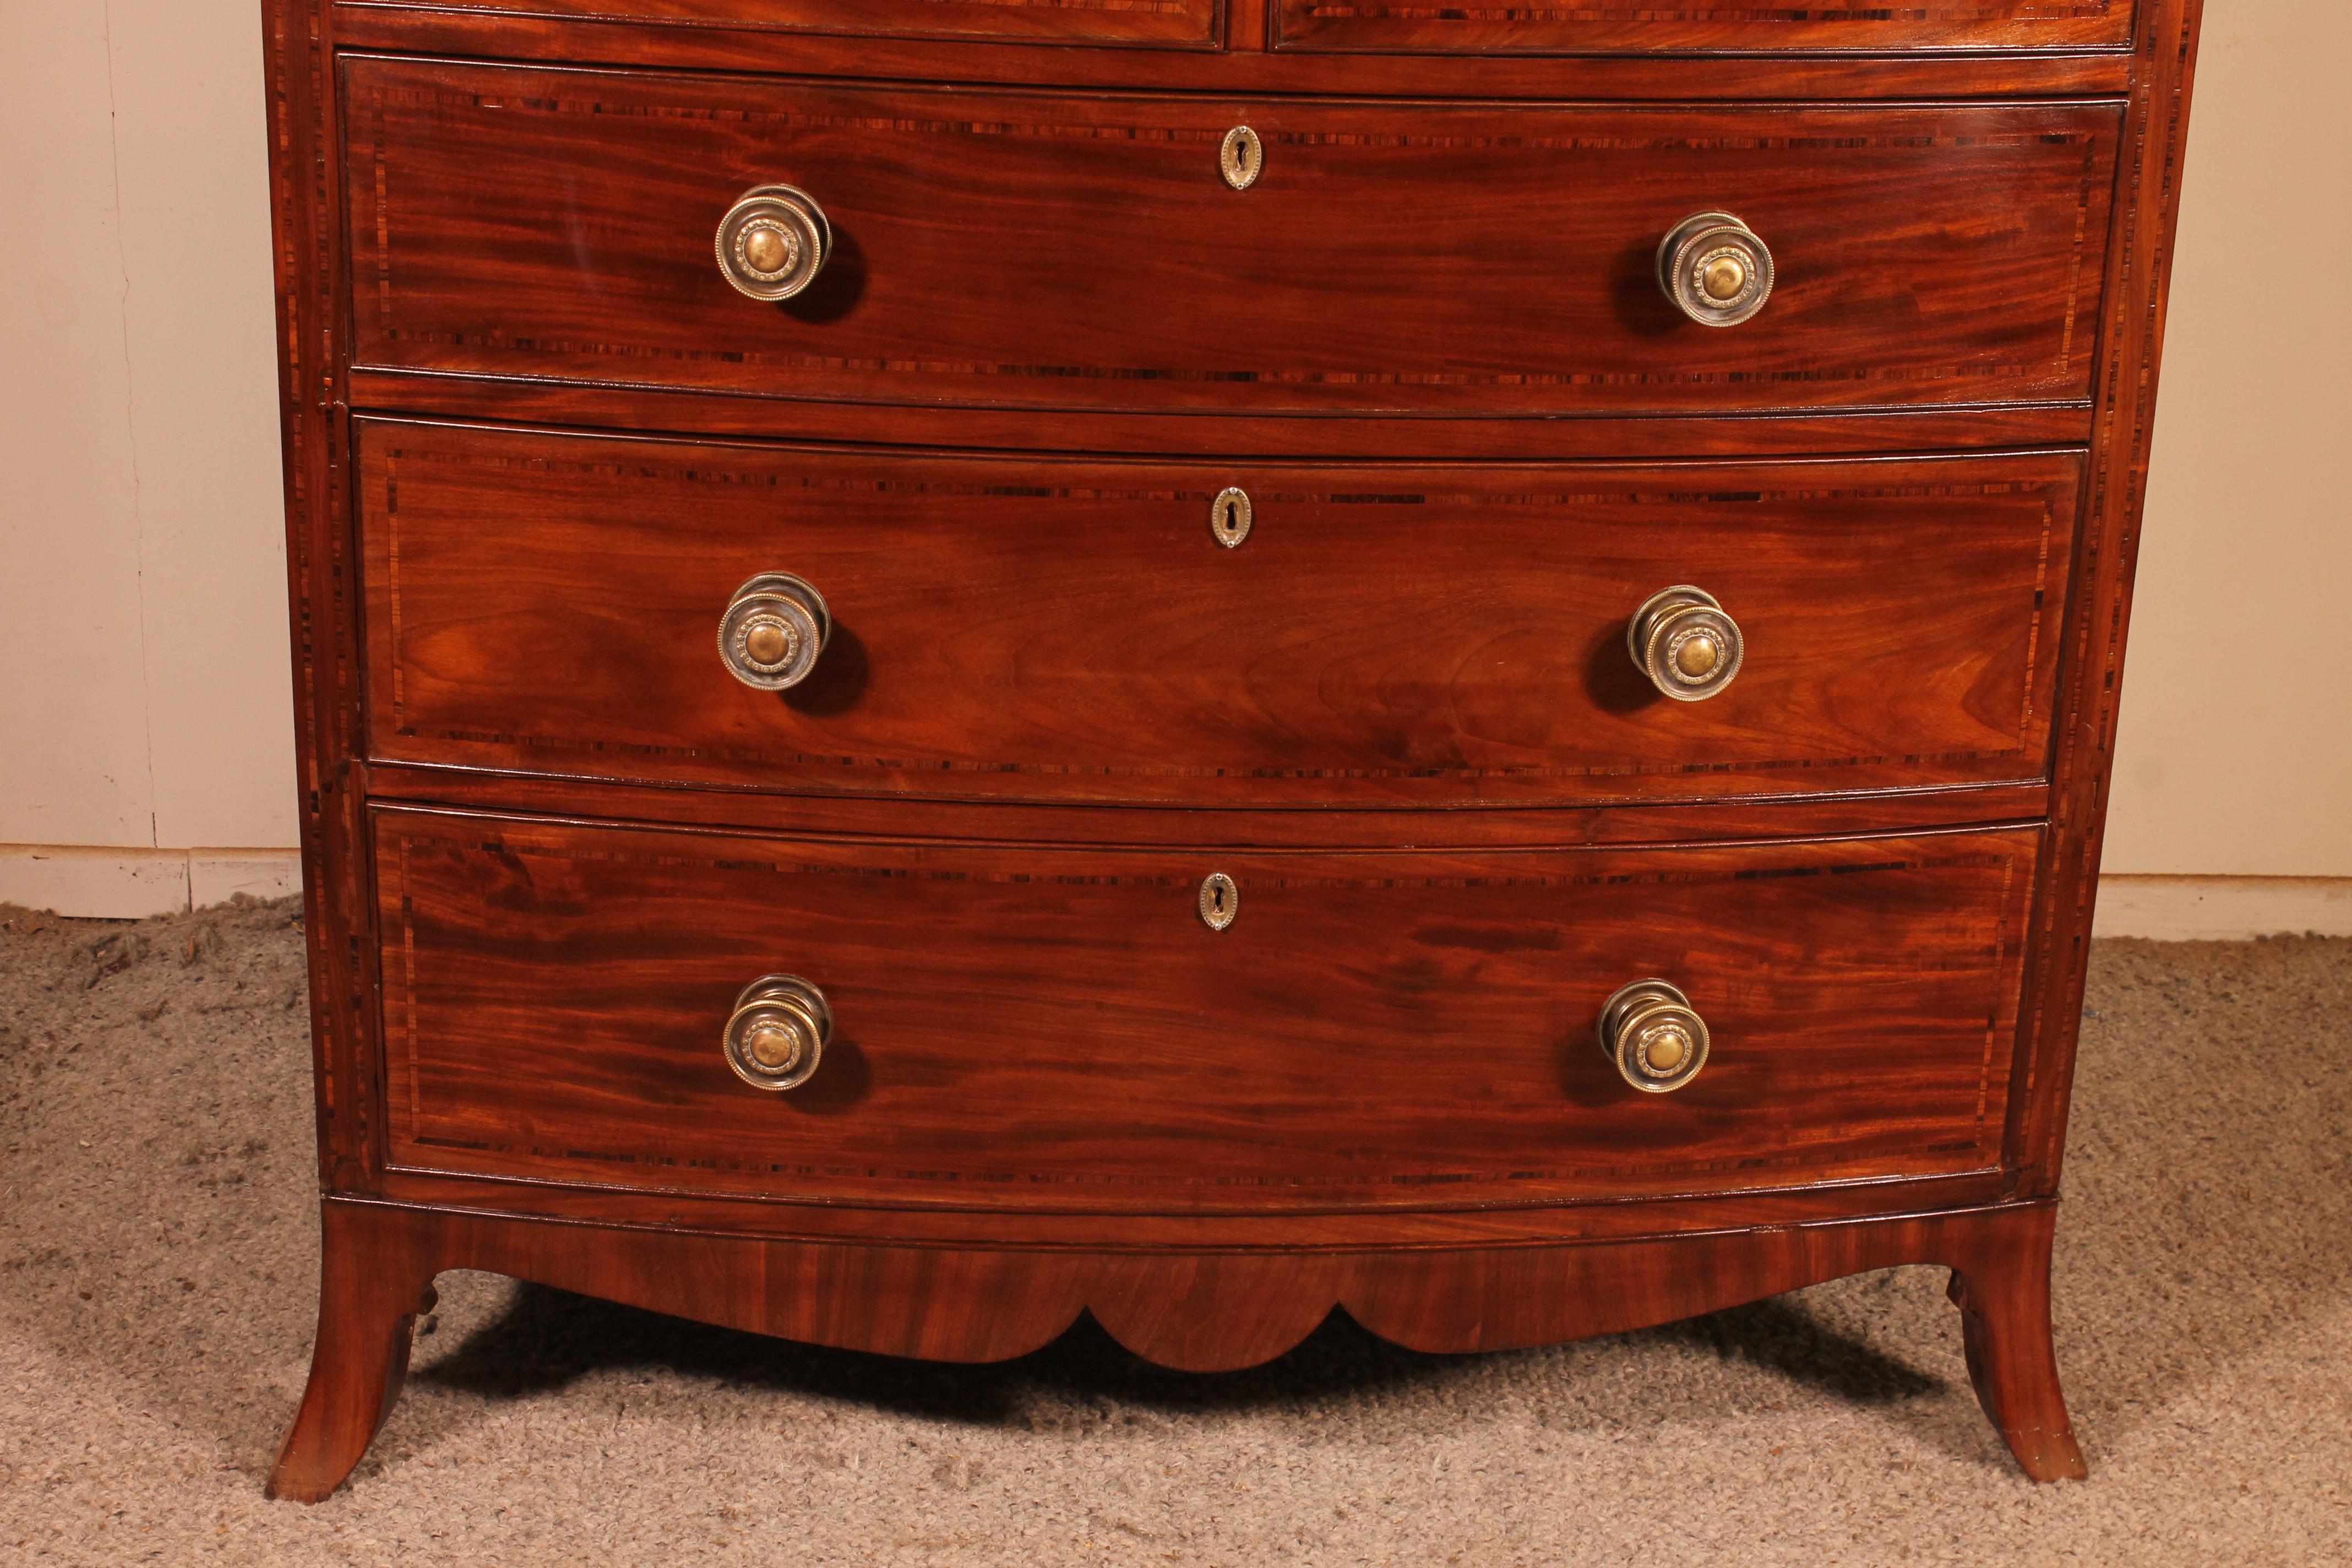 Regency Bowfront Chest of Drawers / Commode in Mahogany and Inlays, Circa 1800